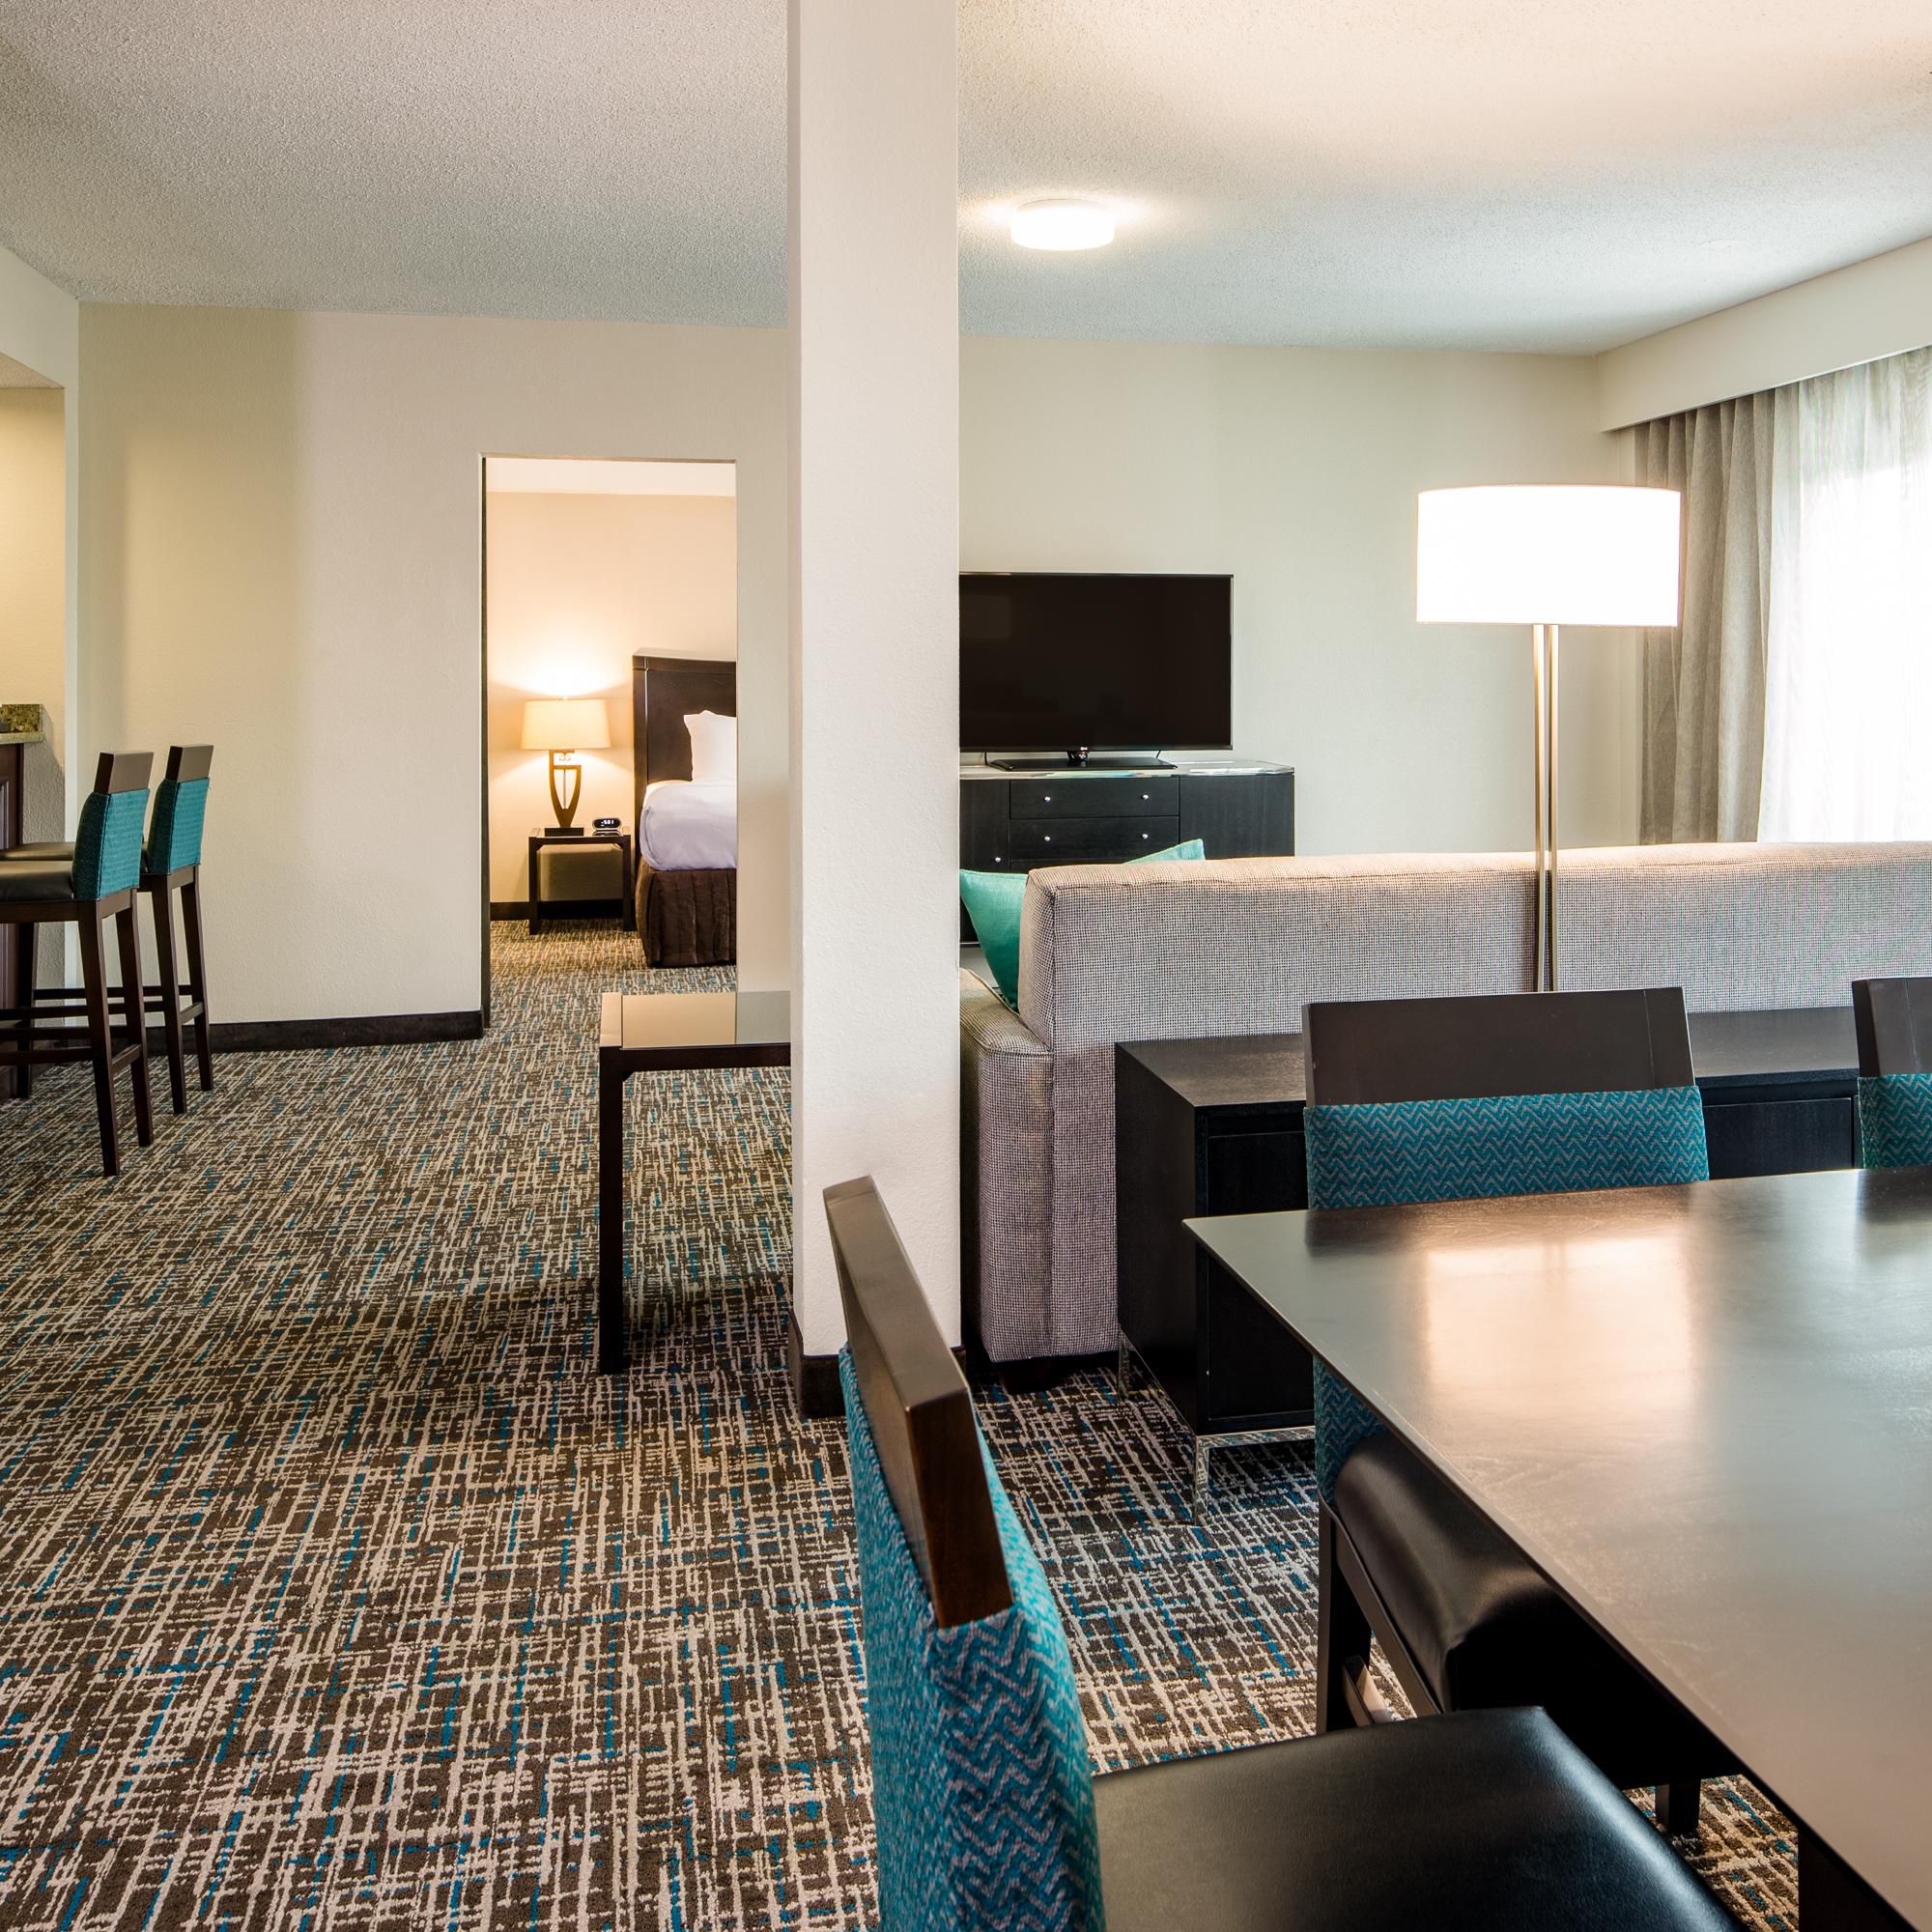 All of our rooms have been updated with a bigger seating area